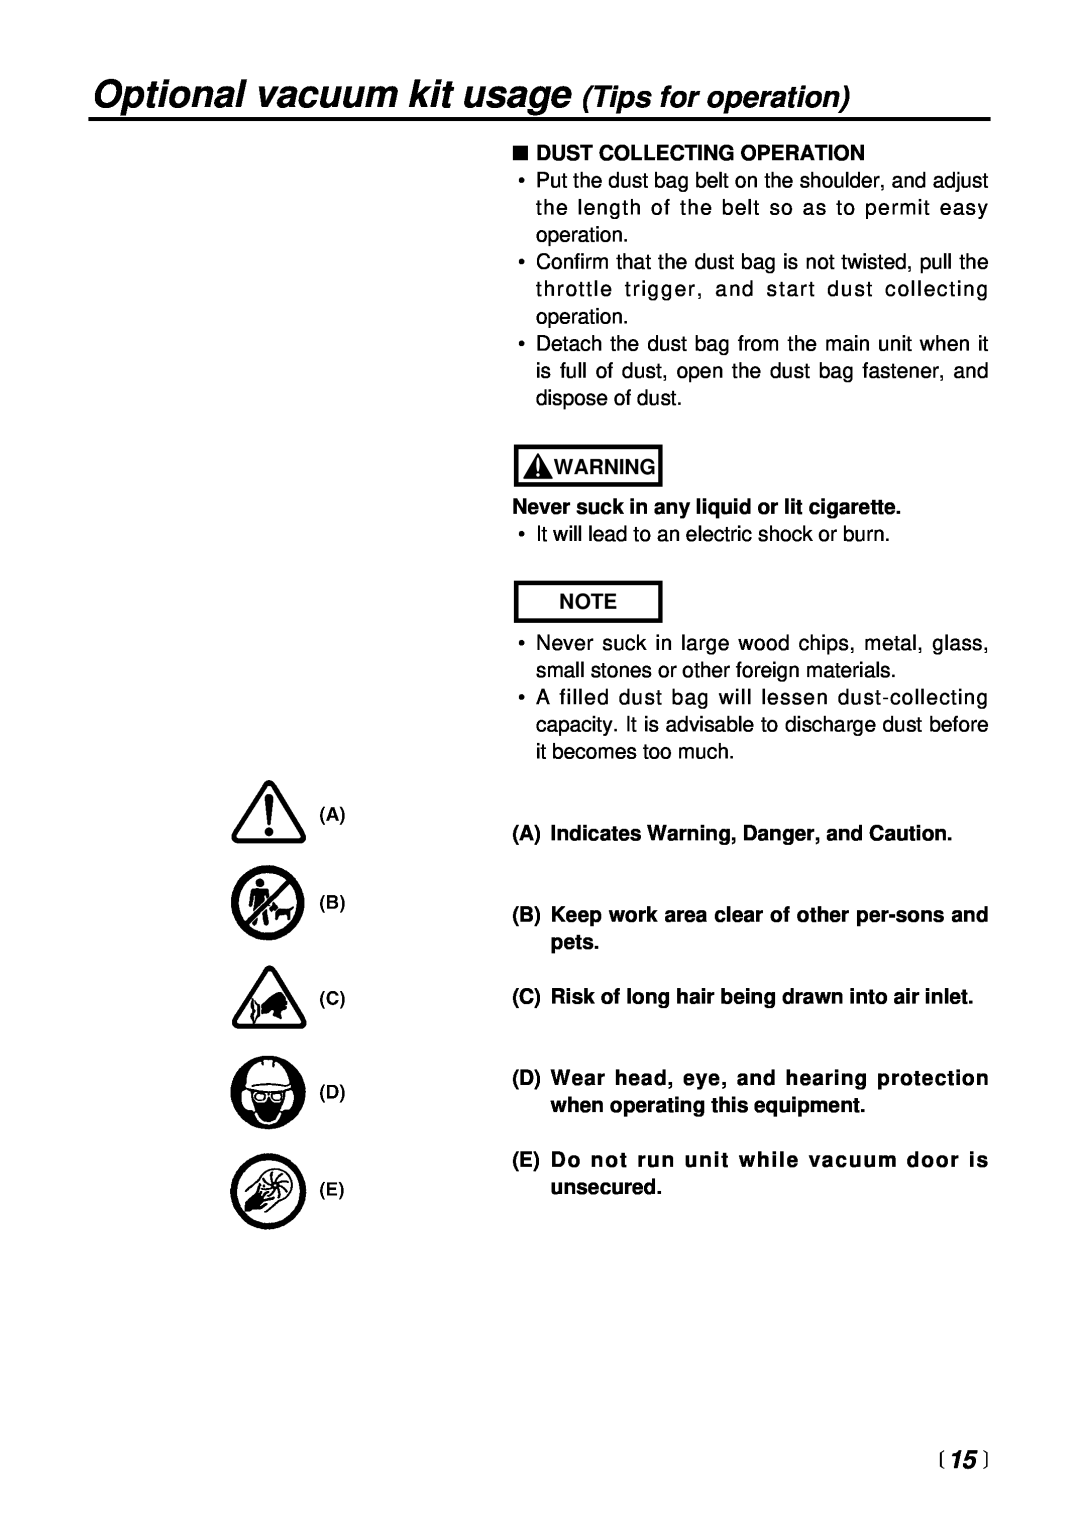 RedMax HBZ2600 manual Optional vacuum kit usage Tips for operation, 15 , Dust Collecting Operation 